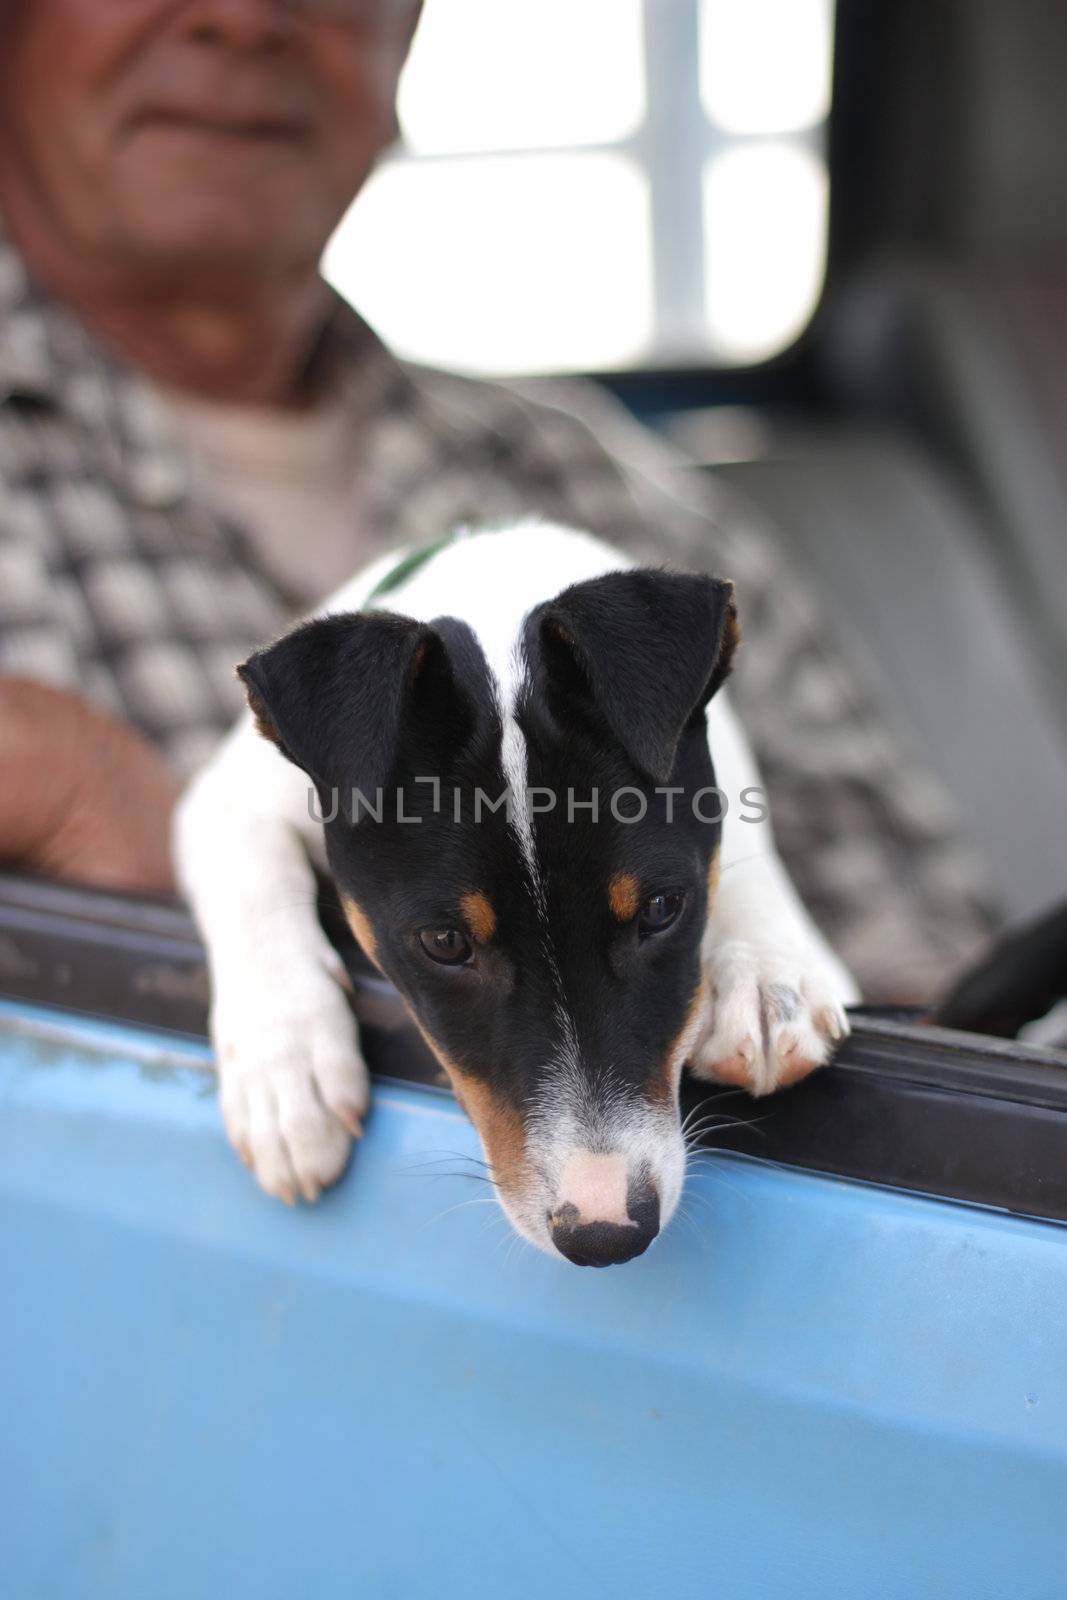 Puppy trying to jump out of car by annems